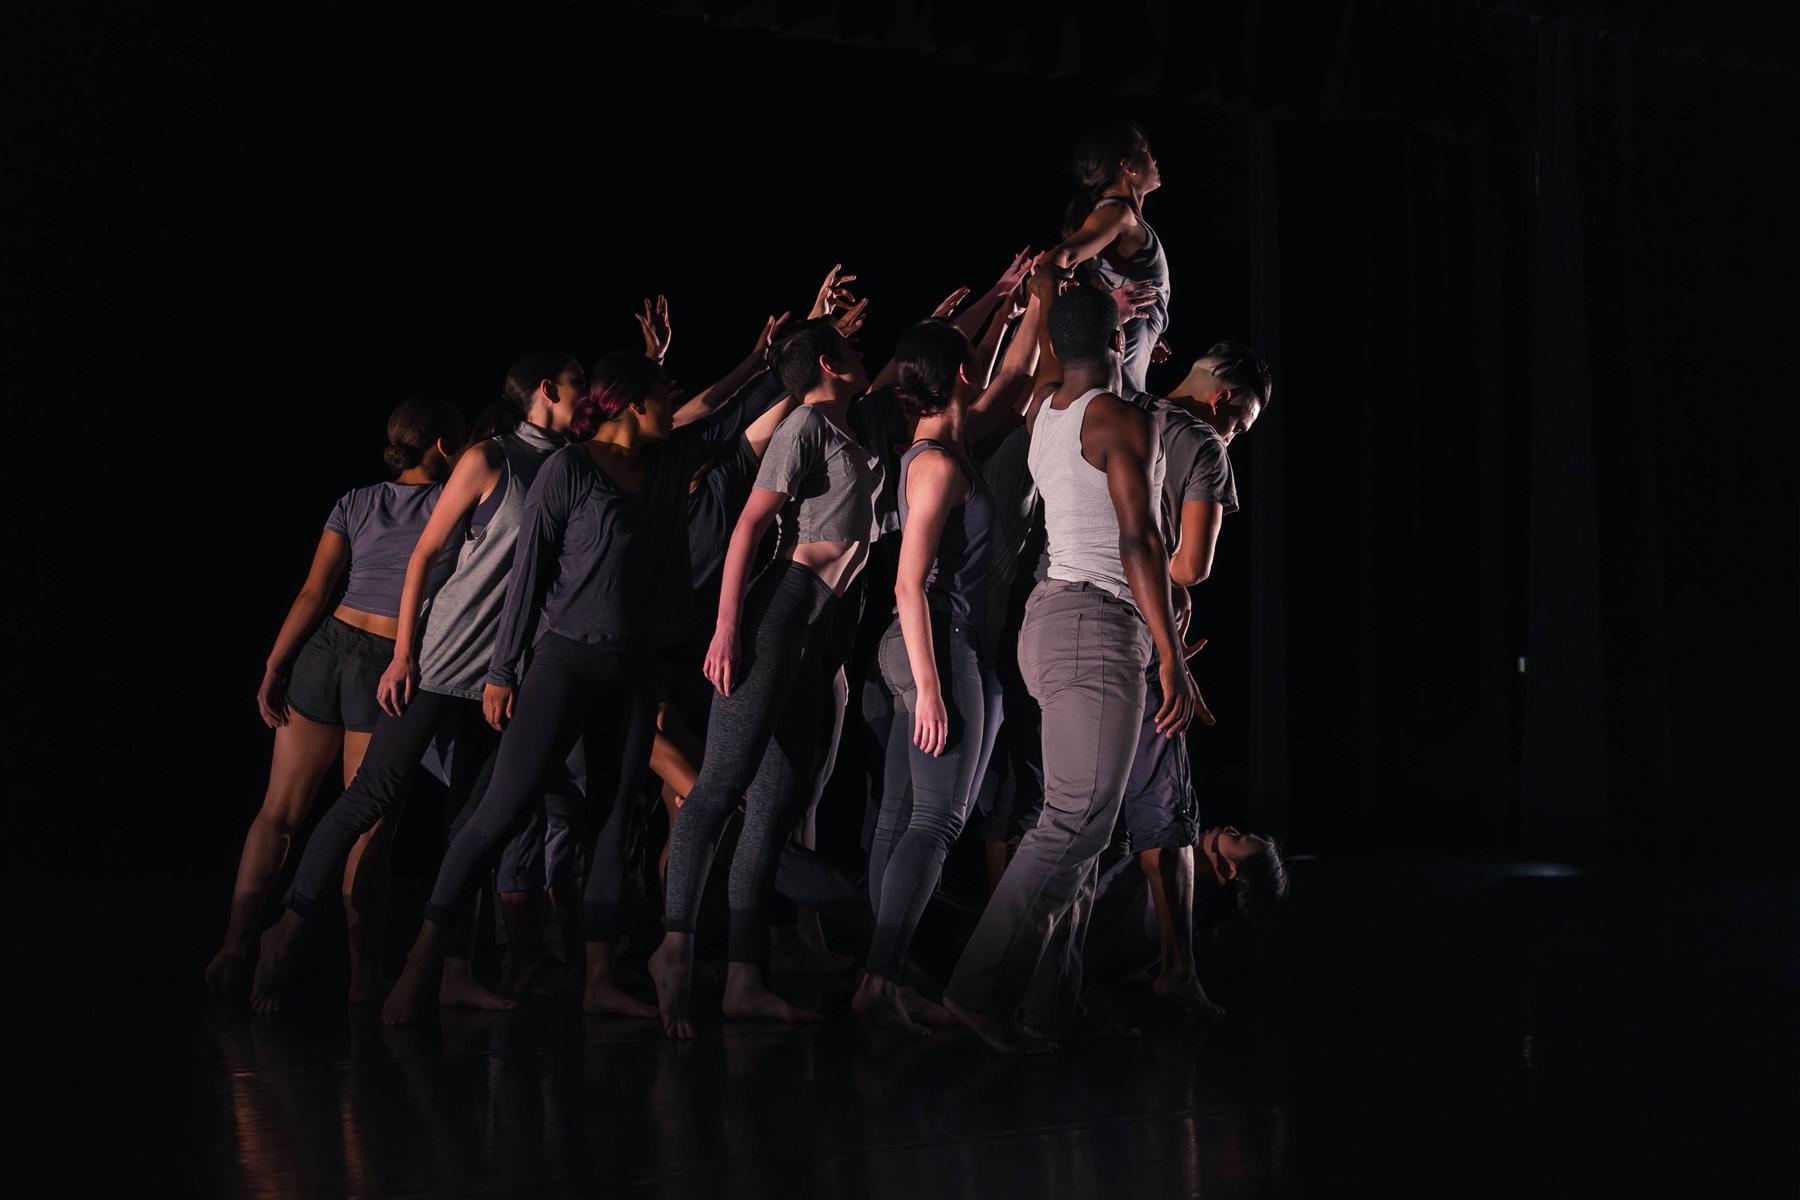 Dance students under a bright spotlight in a dark stadium pose tightly together on stage.